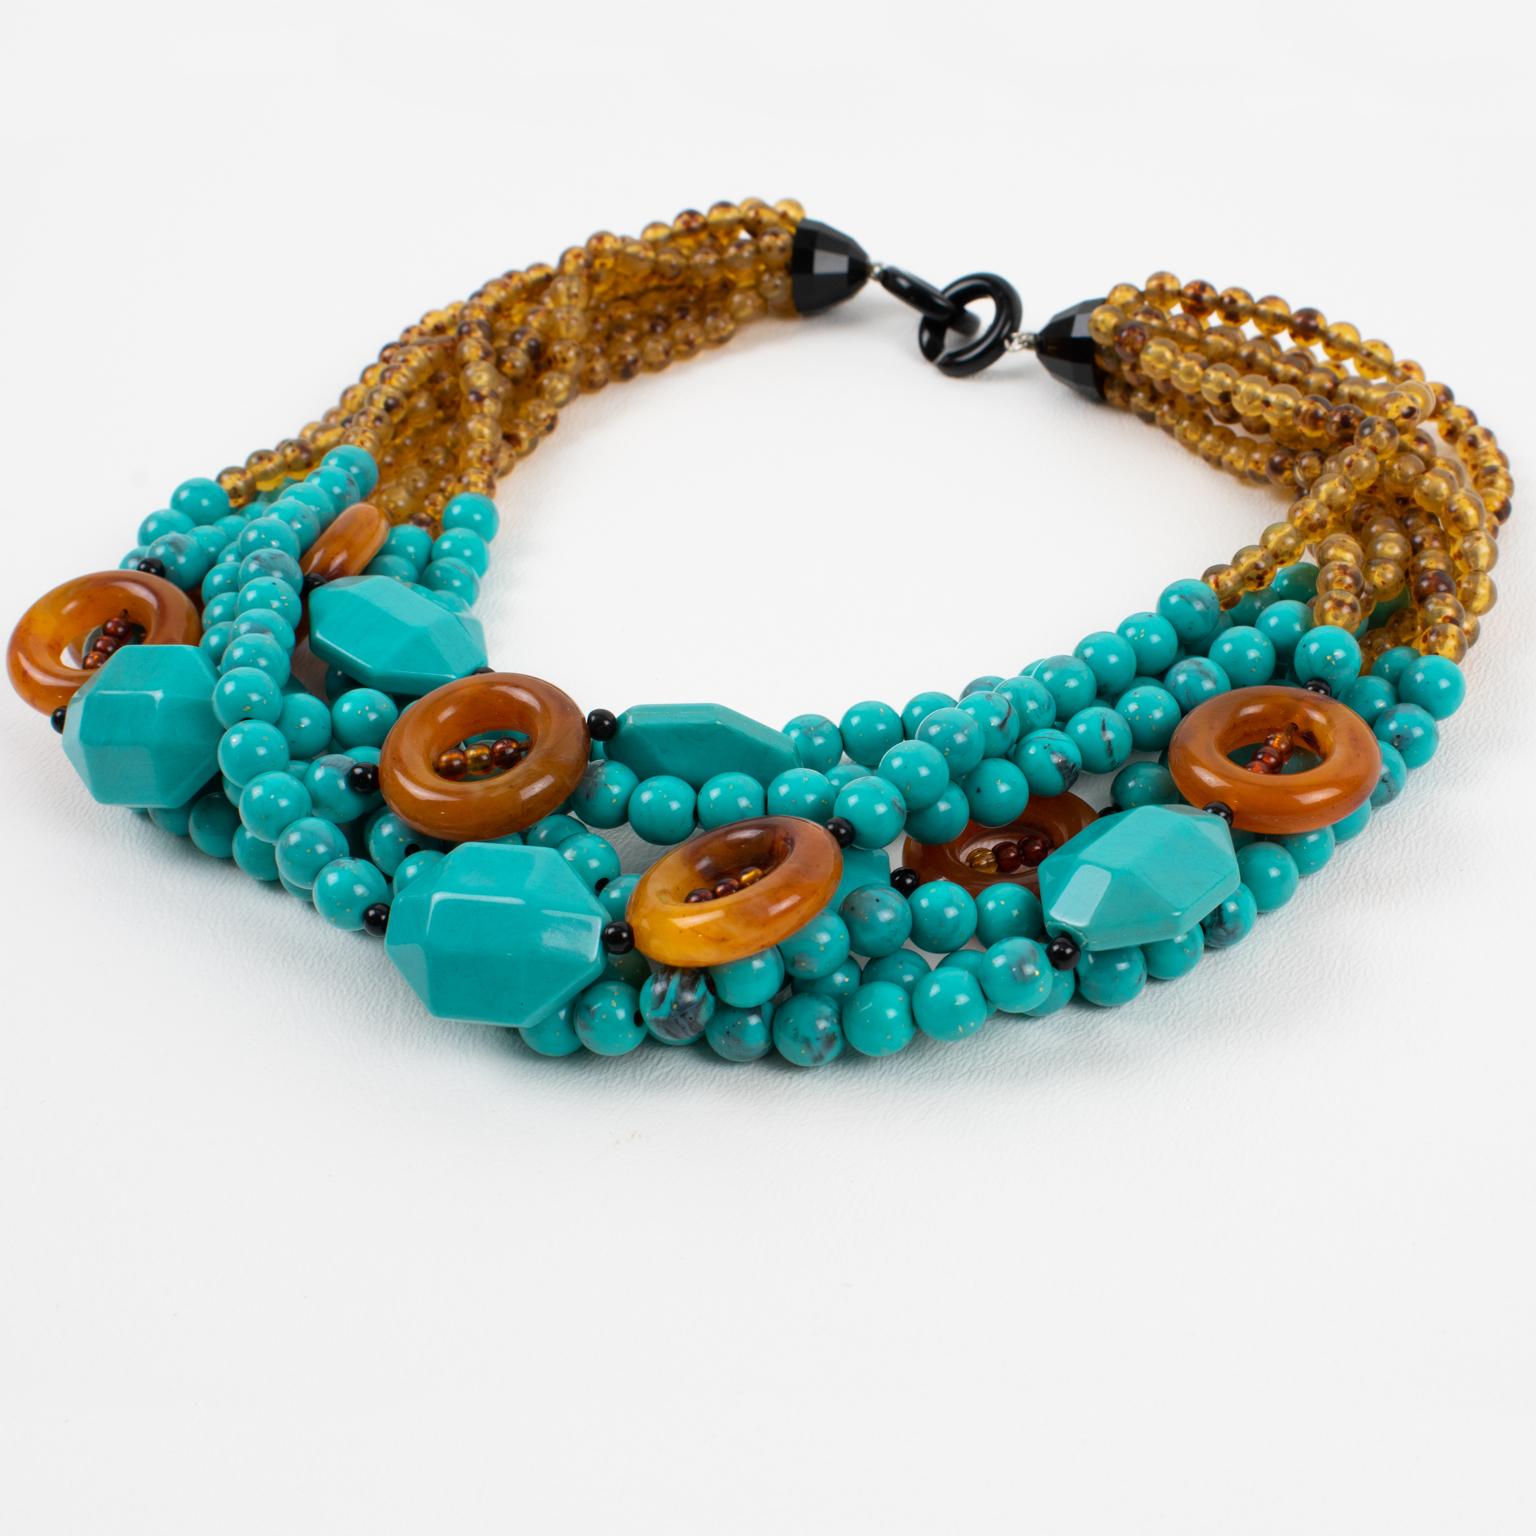 Angela Caputi Resin Choker Necklace Turquoise and Brown Multi-Strand In Excellent Condition For Sale In Atlanta, GA